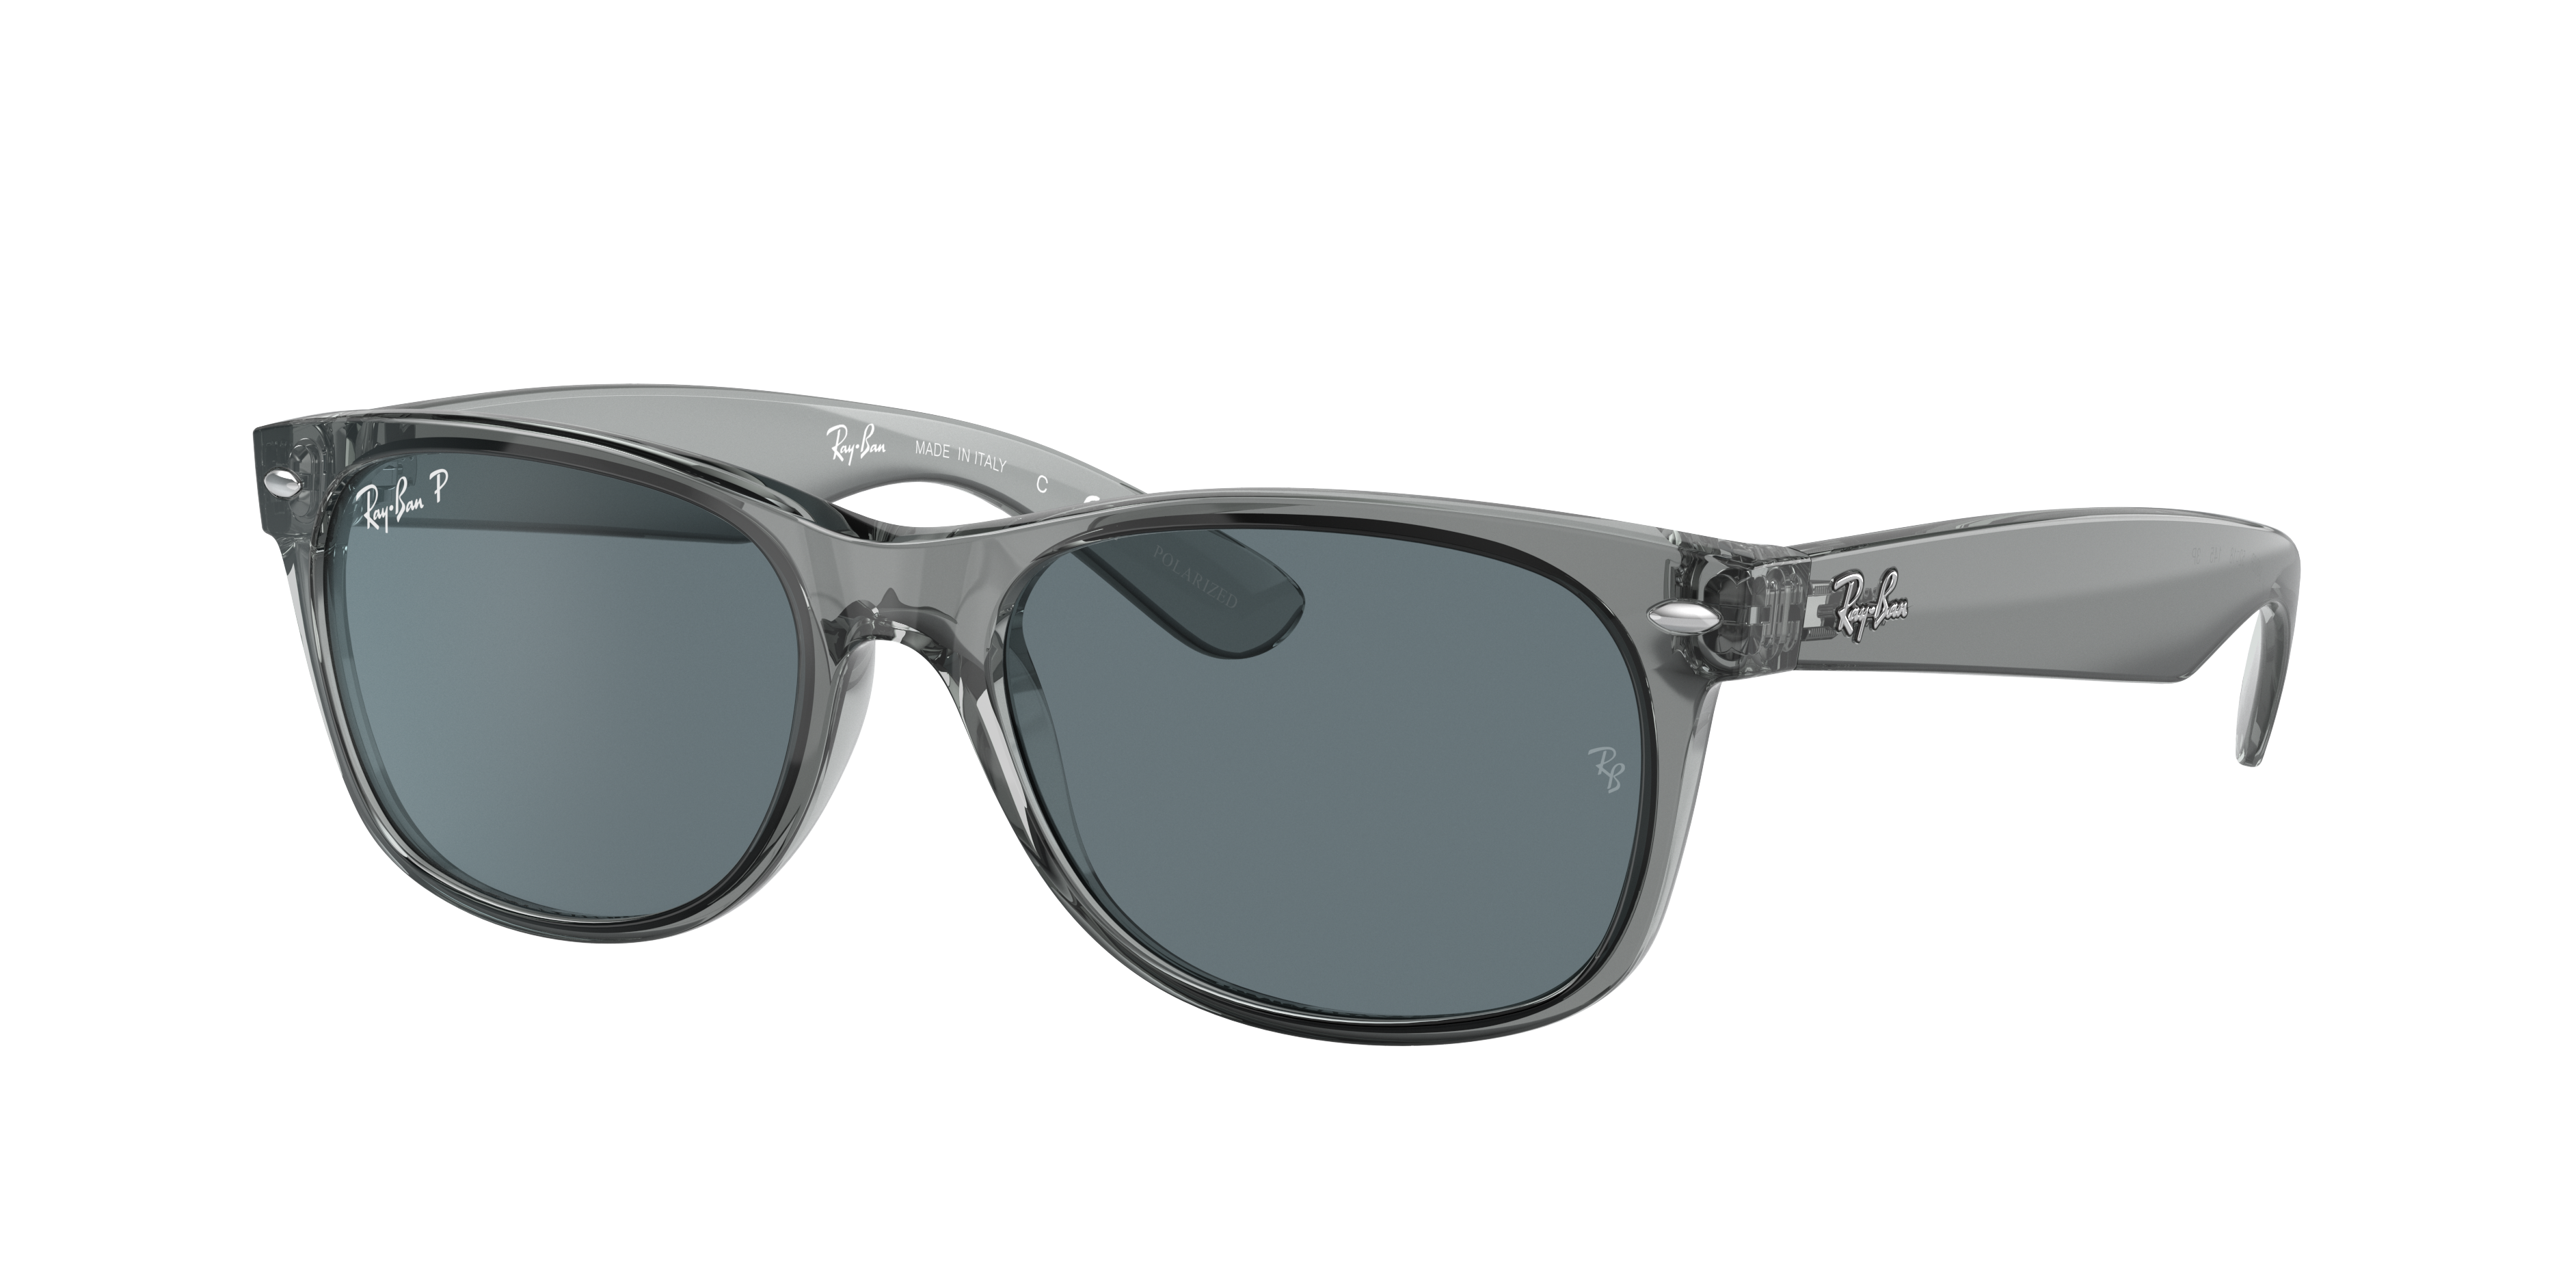 New Wayfarer Classic Sunglasses in Transparent Grey and Blue | Ray-Ban®